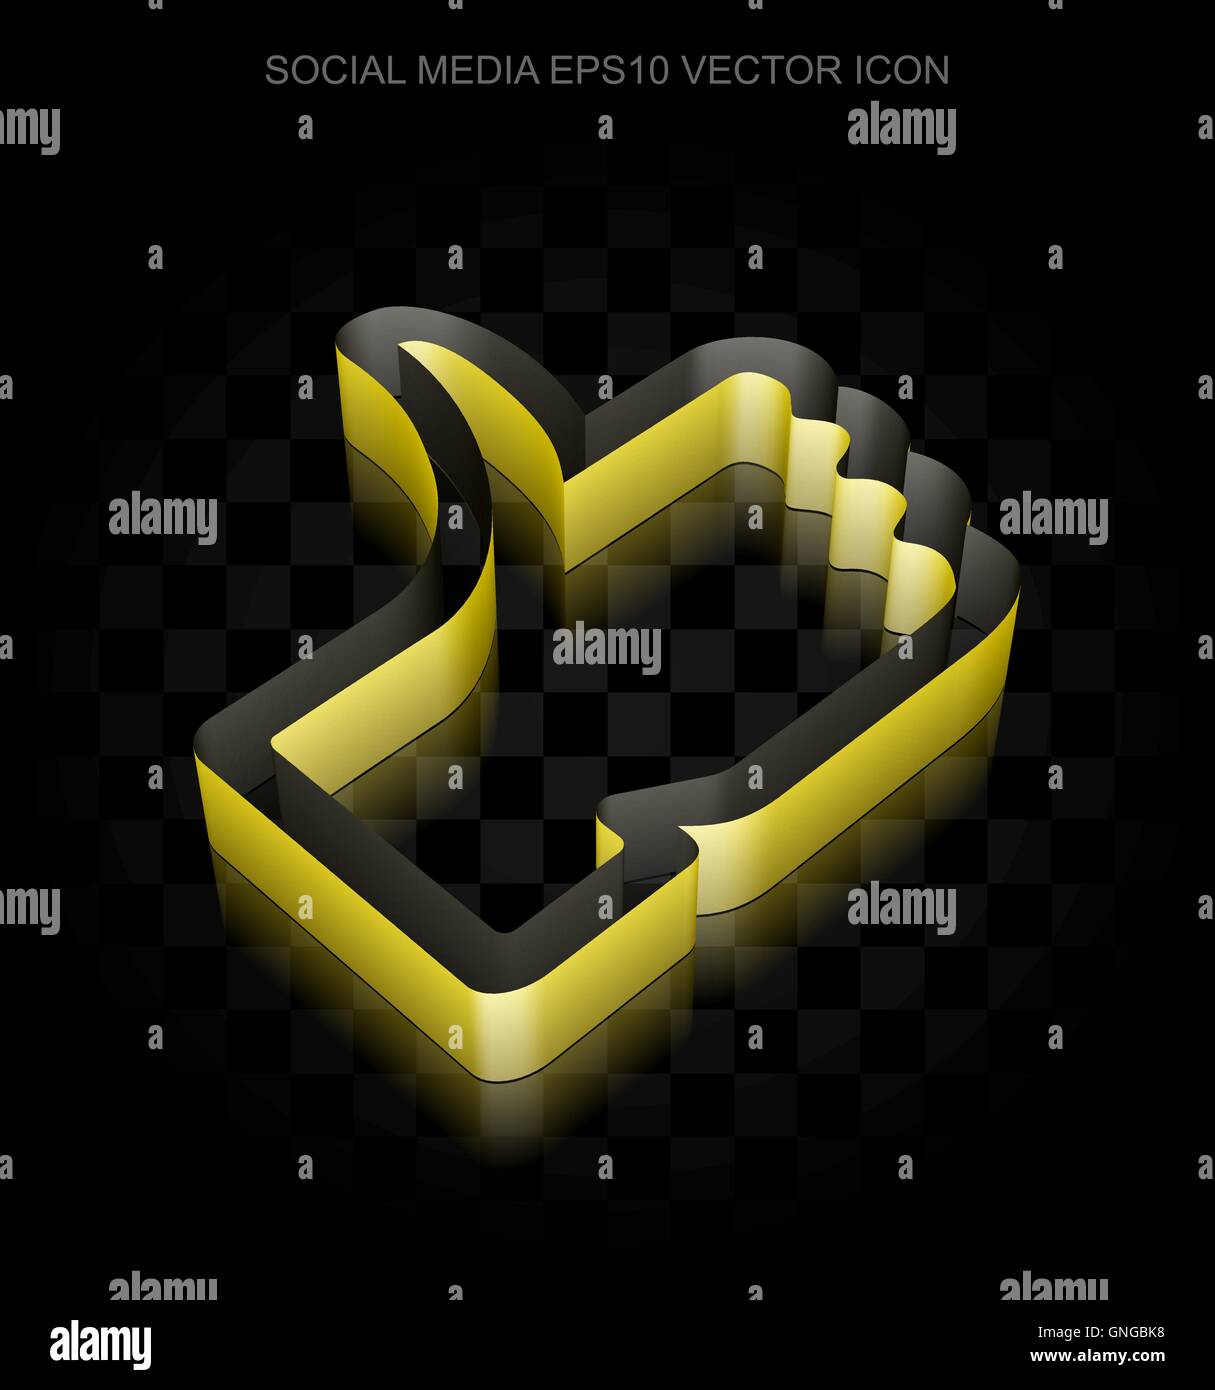 Social network icon: Yellow 3d Thumb Up made of paper, transparent shadow, EPS 10 vector. Stock Vector